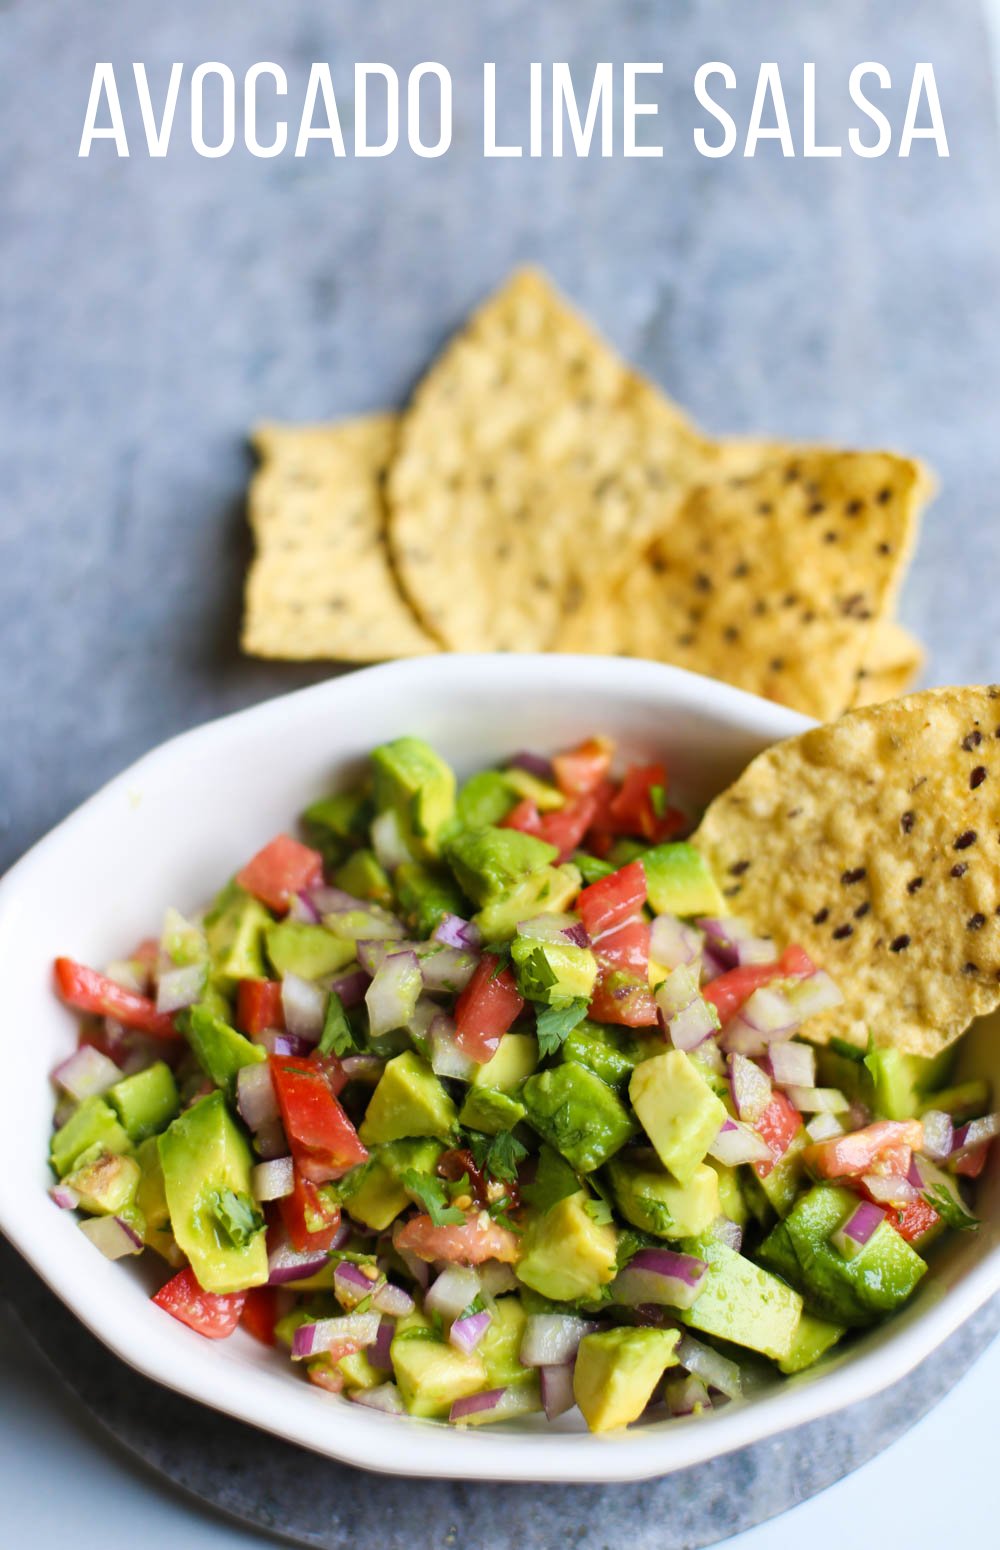 Bowl of Avocado Lime Salsa with tortilla chips on the side.